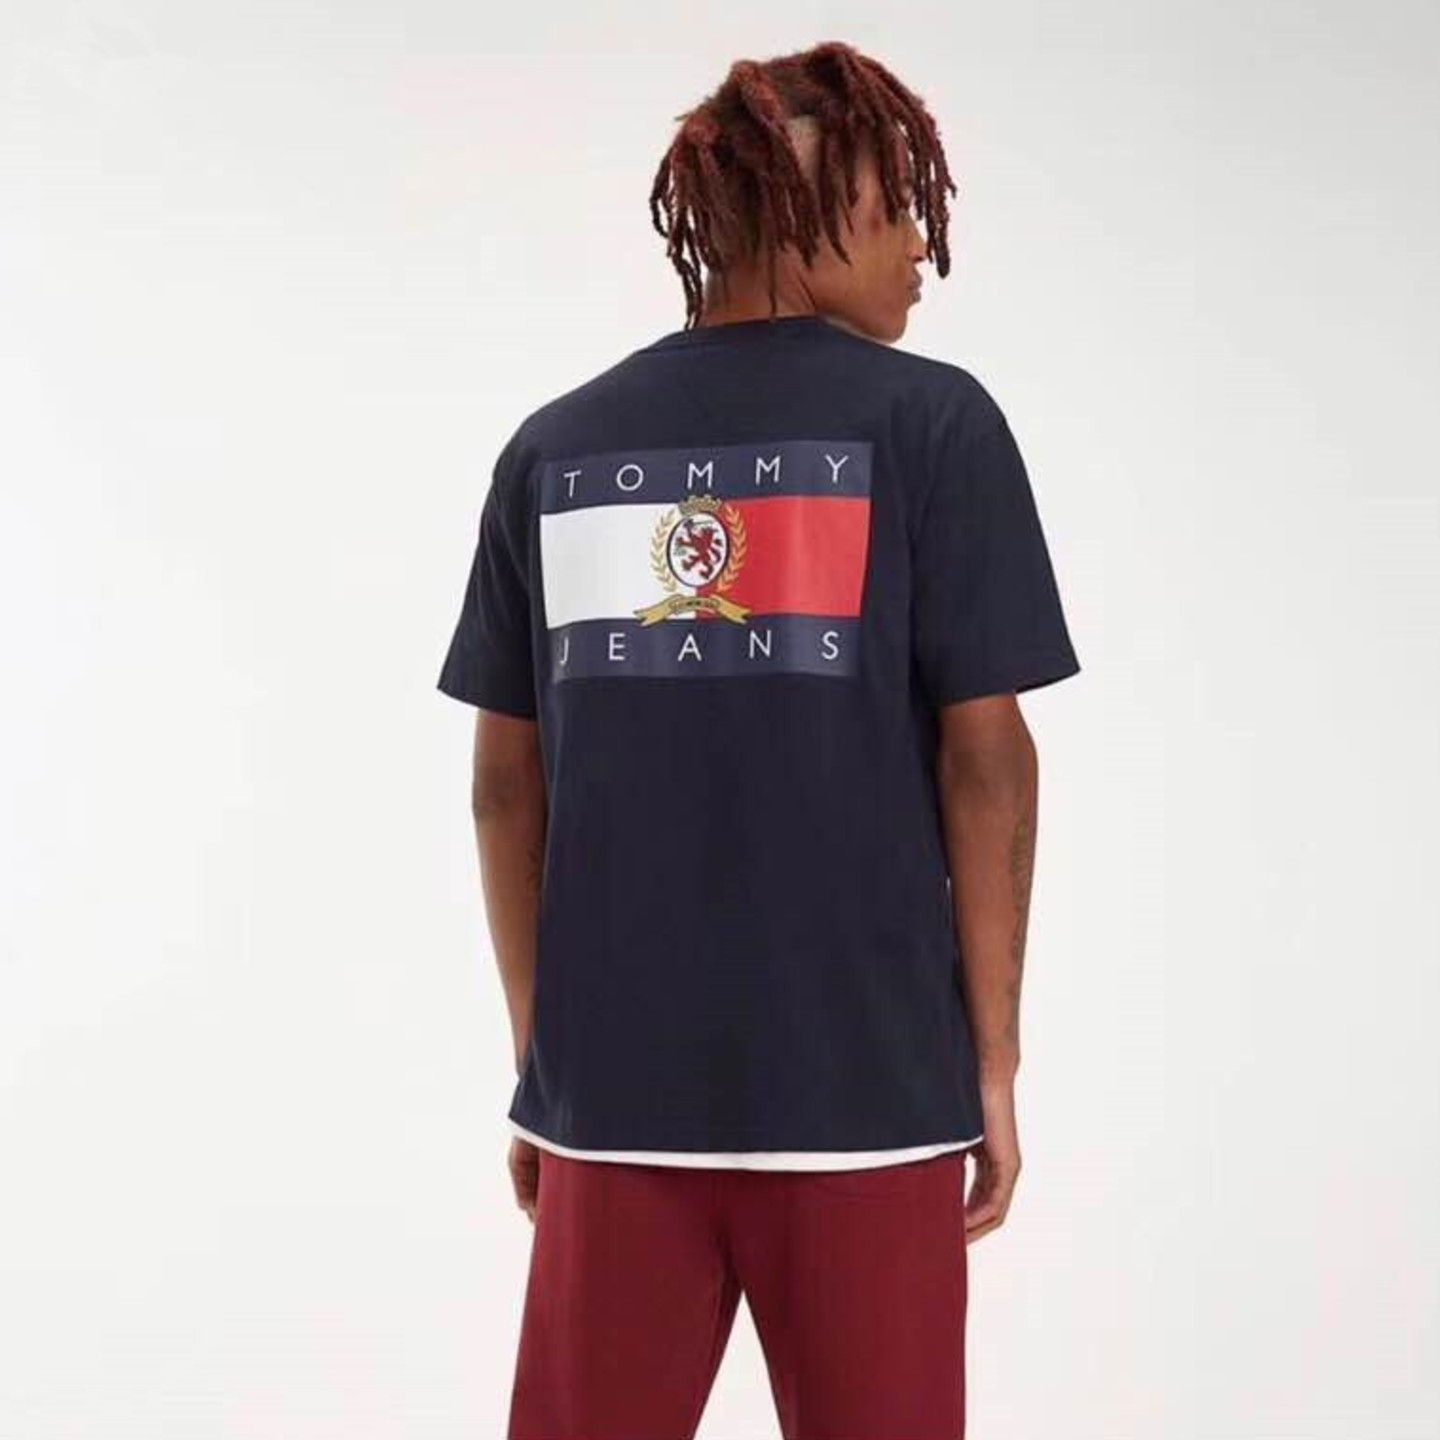 Tommy Jeans 6.0 Limited Capsule crew neck T-shirt